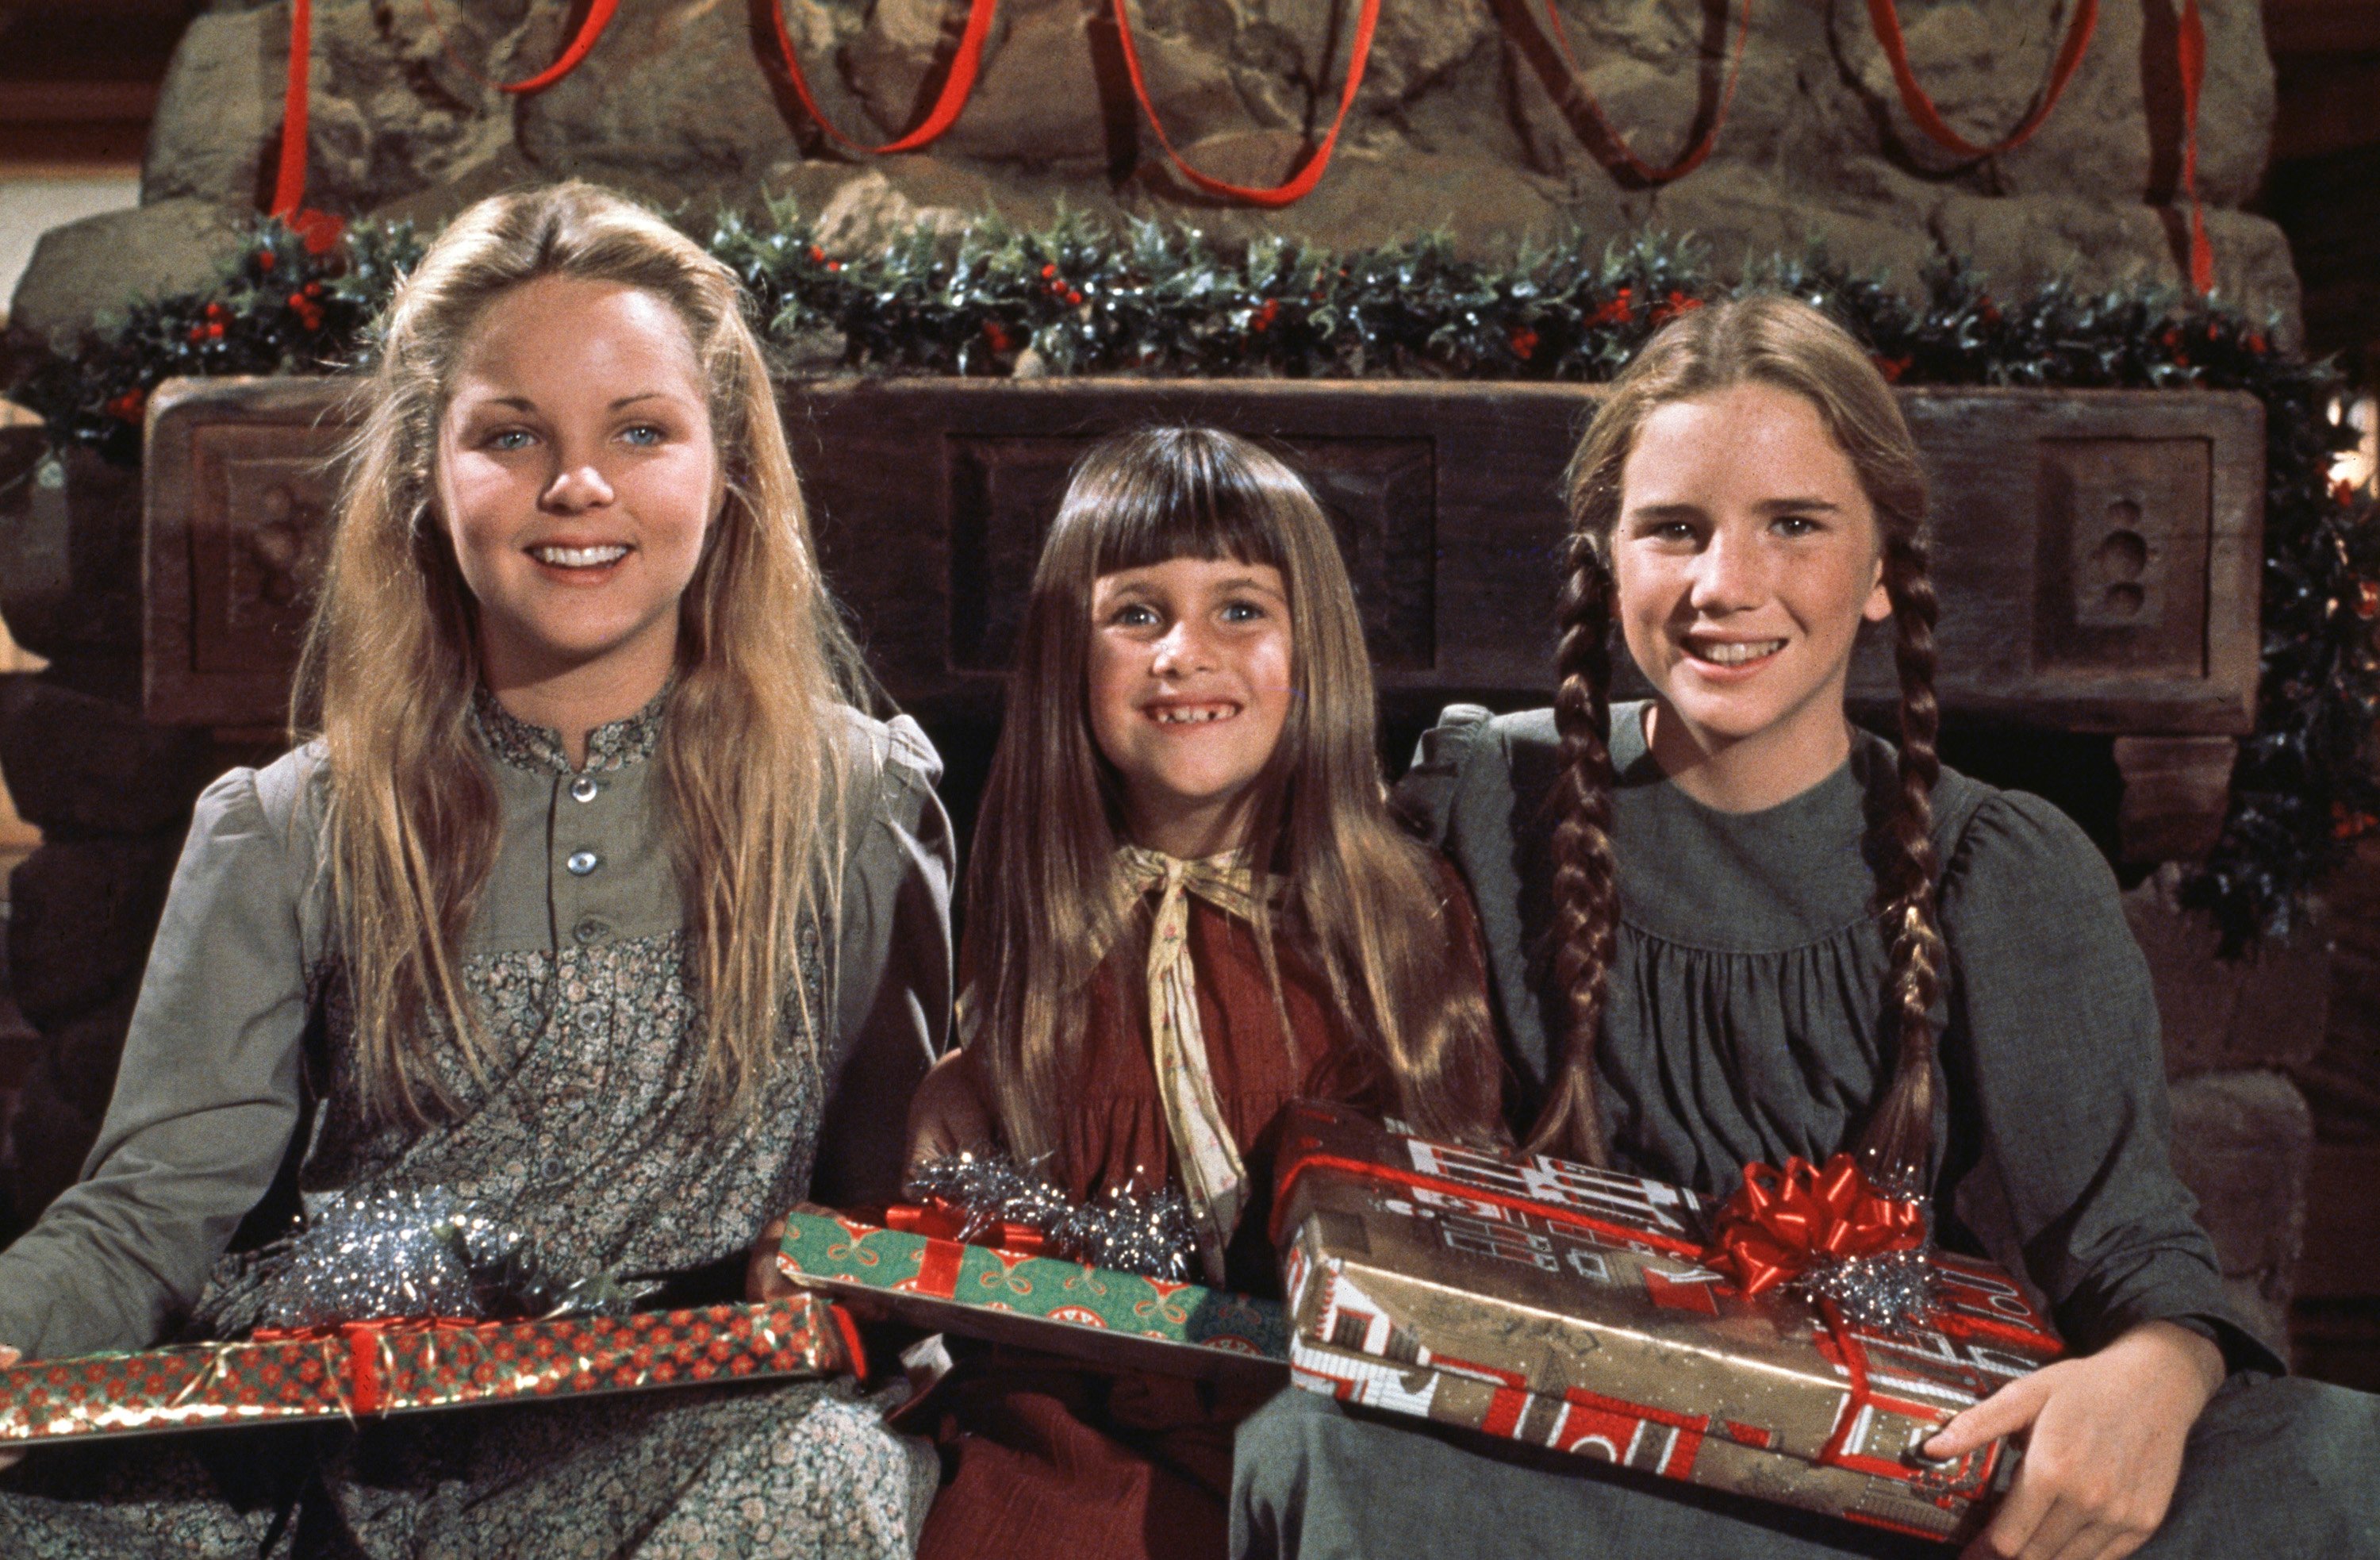 Melissa Sue Anderson as Mary Ingalls, Lindsay/Sidney Greenbush as Carrie Ingalls, and Melissa Gilbert as Laura Elizabeth Ingalls holding presents